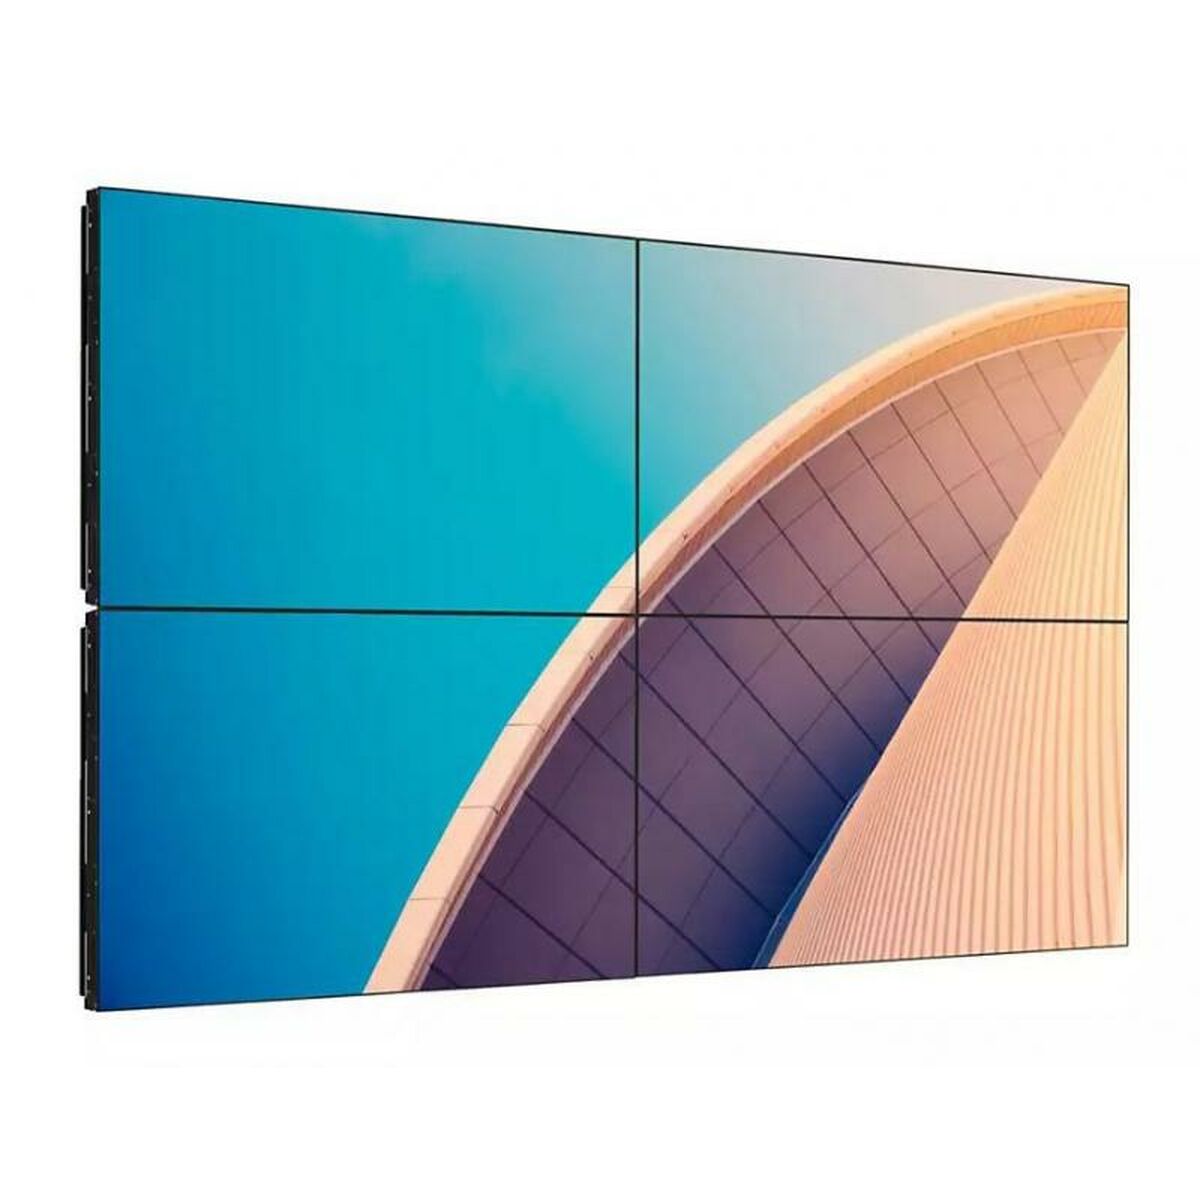 Monitor Videowall Philips 55BDL3107X/02 55" LCD, Philips, Computing, monitor-videowall-philips-55bdl3107x-02-55-lcd, :Full HD, Brand_Philips, category-reference-2609, category-reference-2642, category-reference-2644, category-reference-t-19685, computers / peripherals, Condition_NEW, office, Price_+ 1000, Teleworking, RiotNook